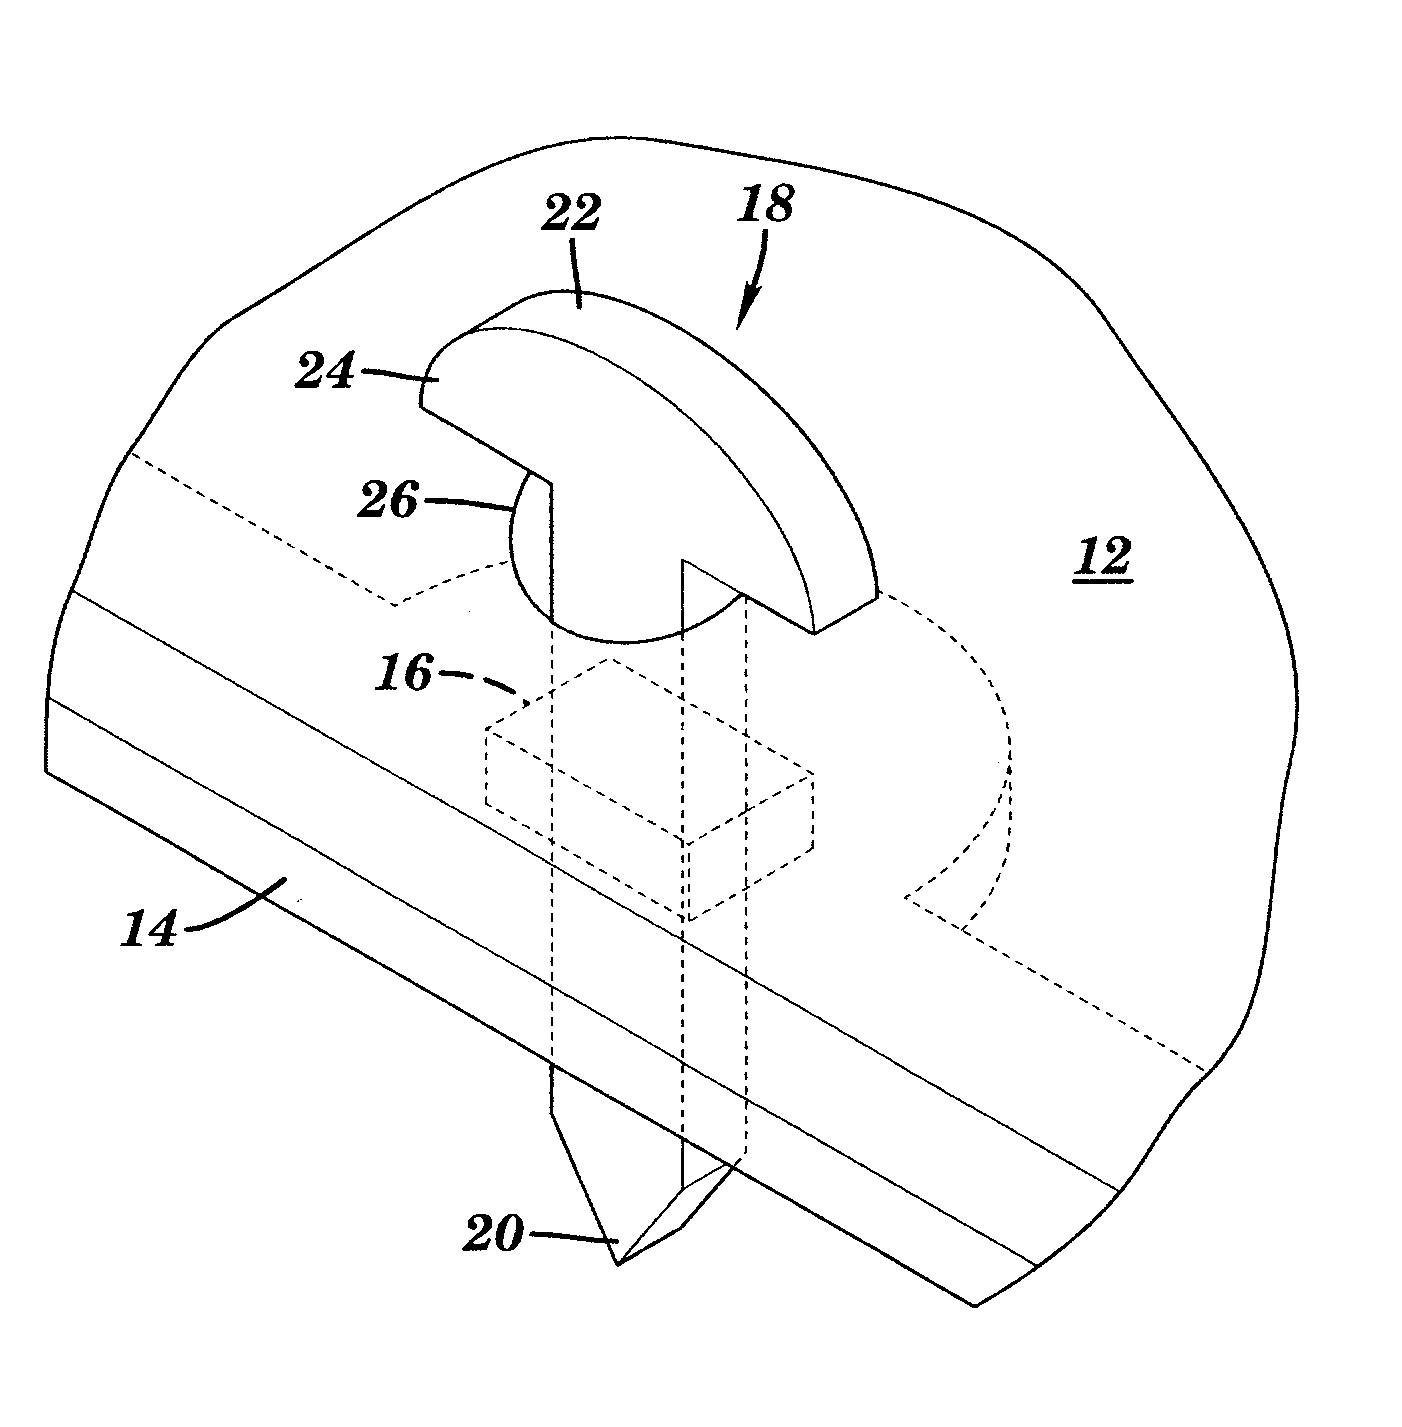 Method and apparatus for retaining an ornament